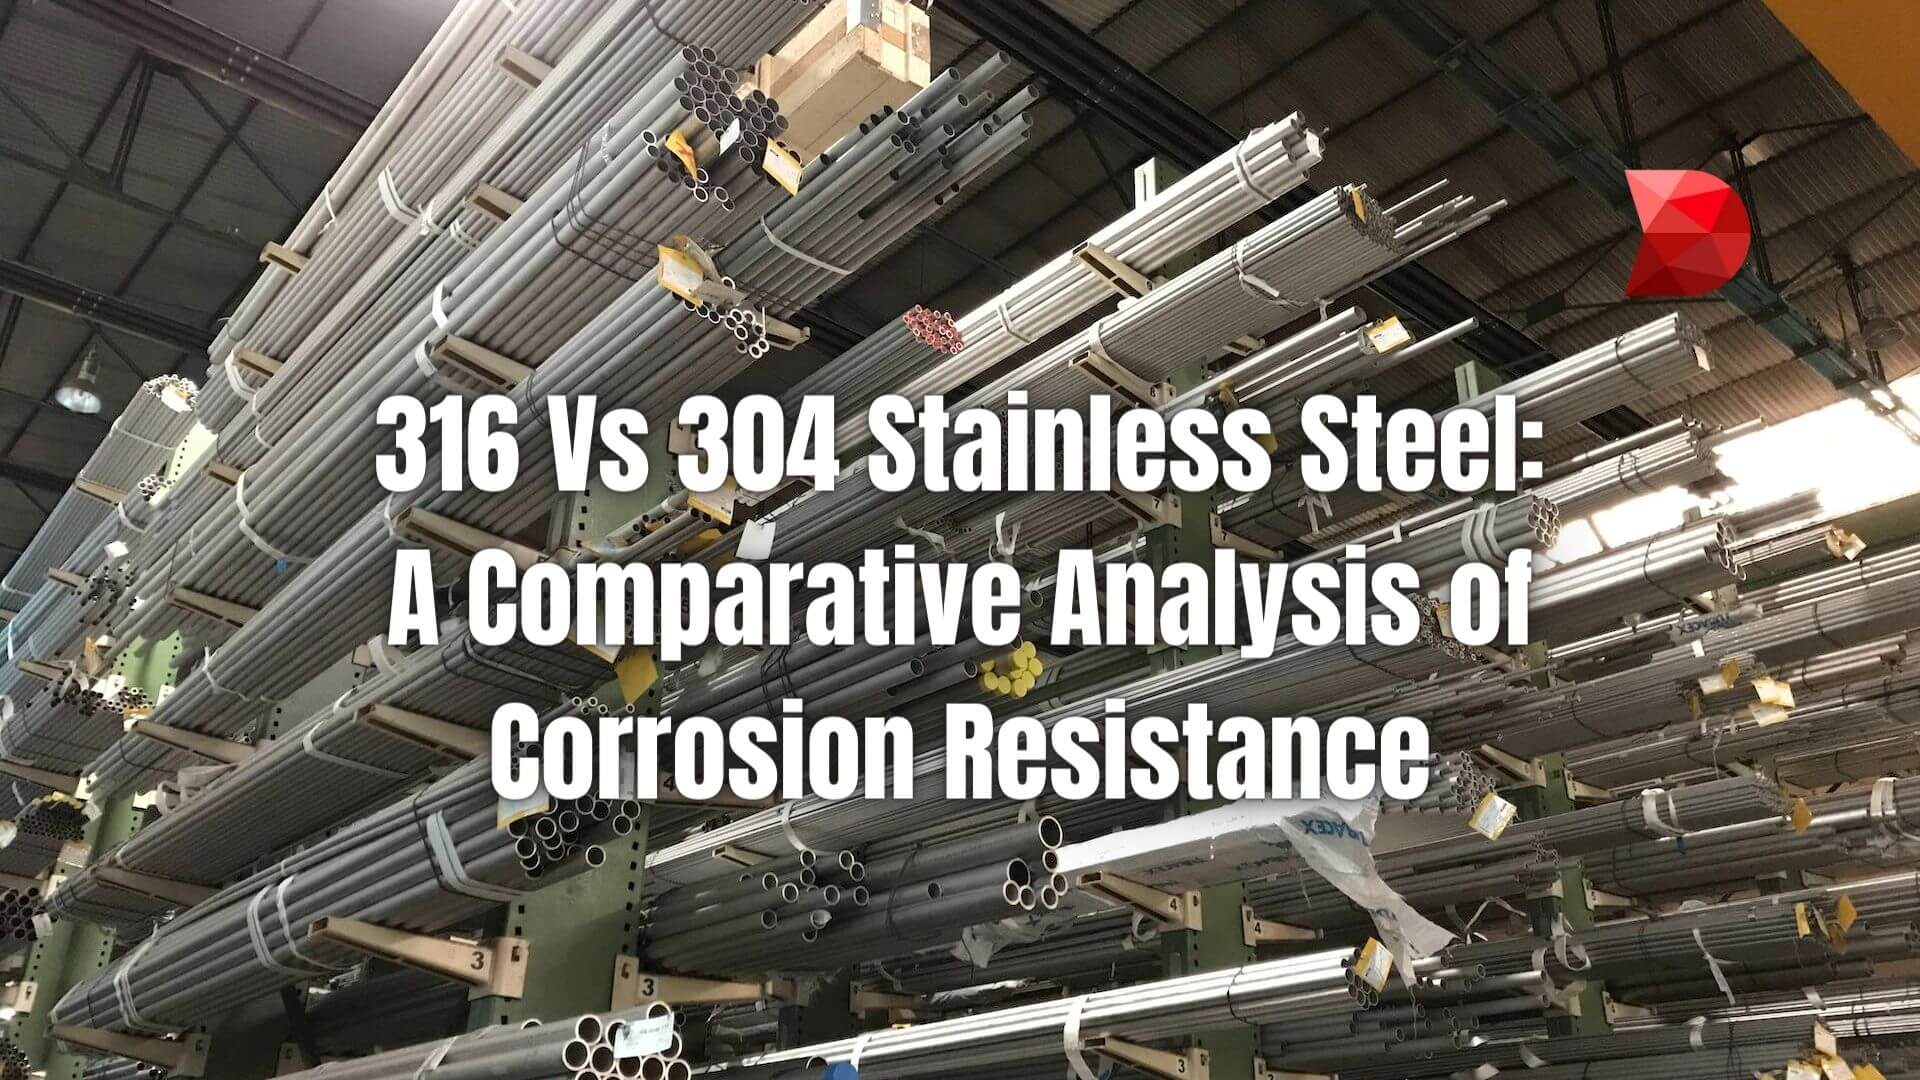 Discover the corrosion differences between 316 vs 304 stainless steel for informed material choices. Get insights in this comparative guide.